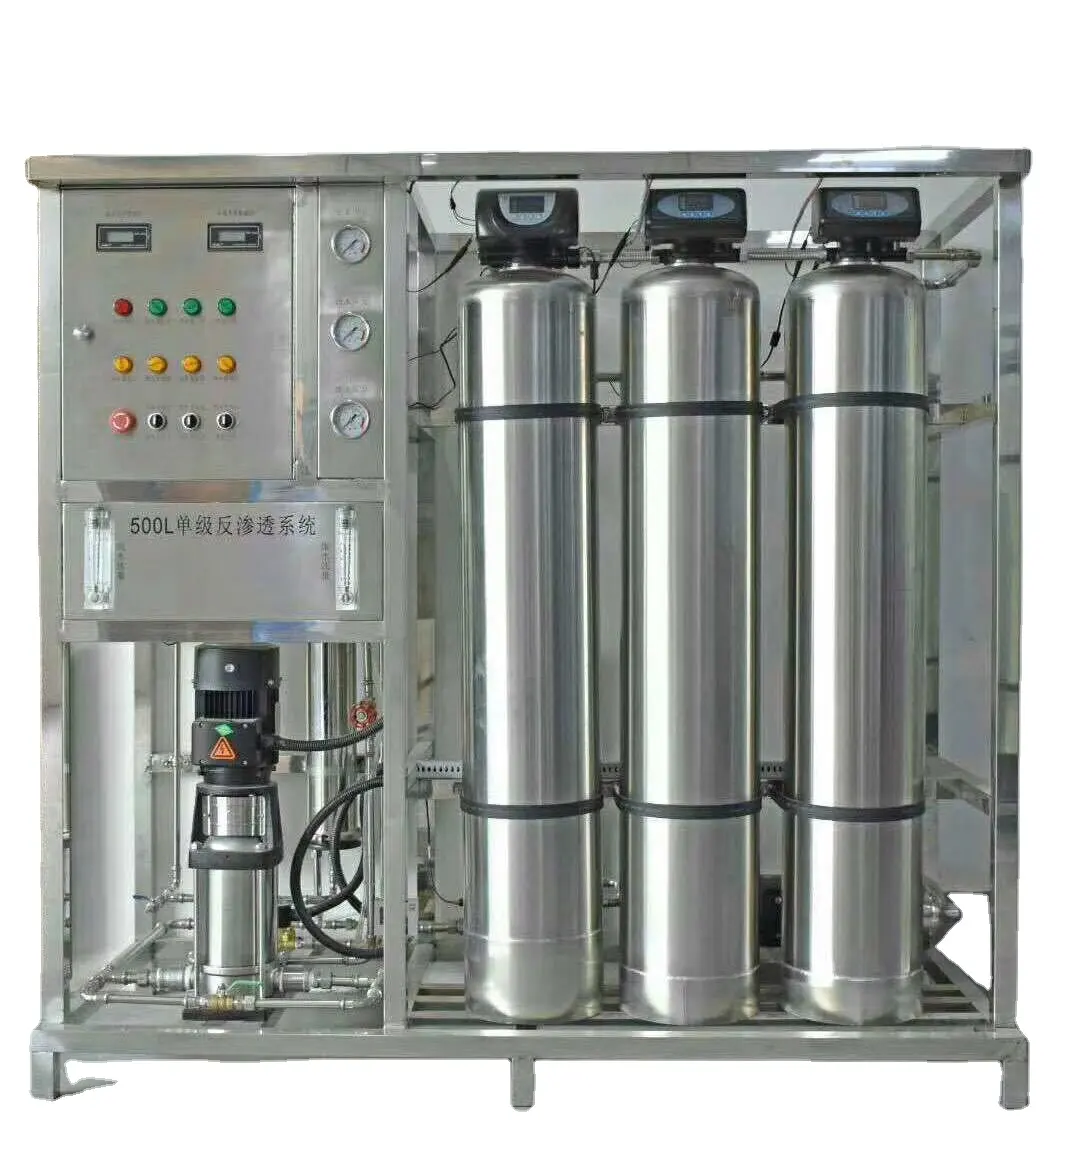 Farm Agriculture Irrigation Water Treatment Equipment Reverse Osmosis Desalination Device for Deep Well Salty Water